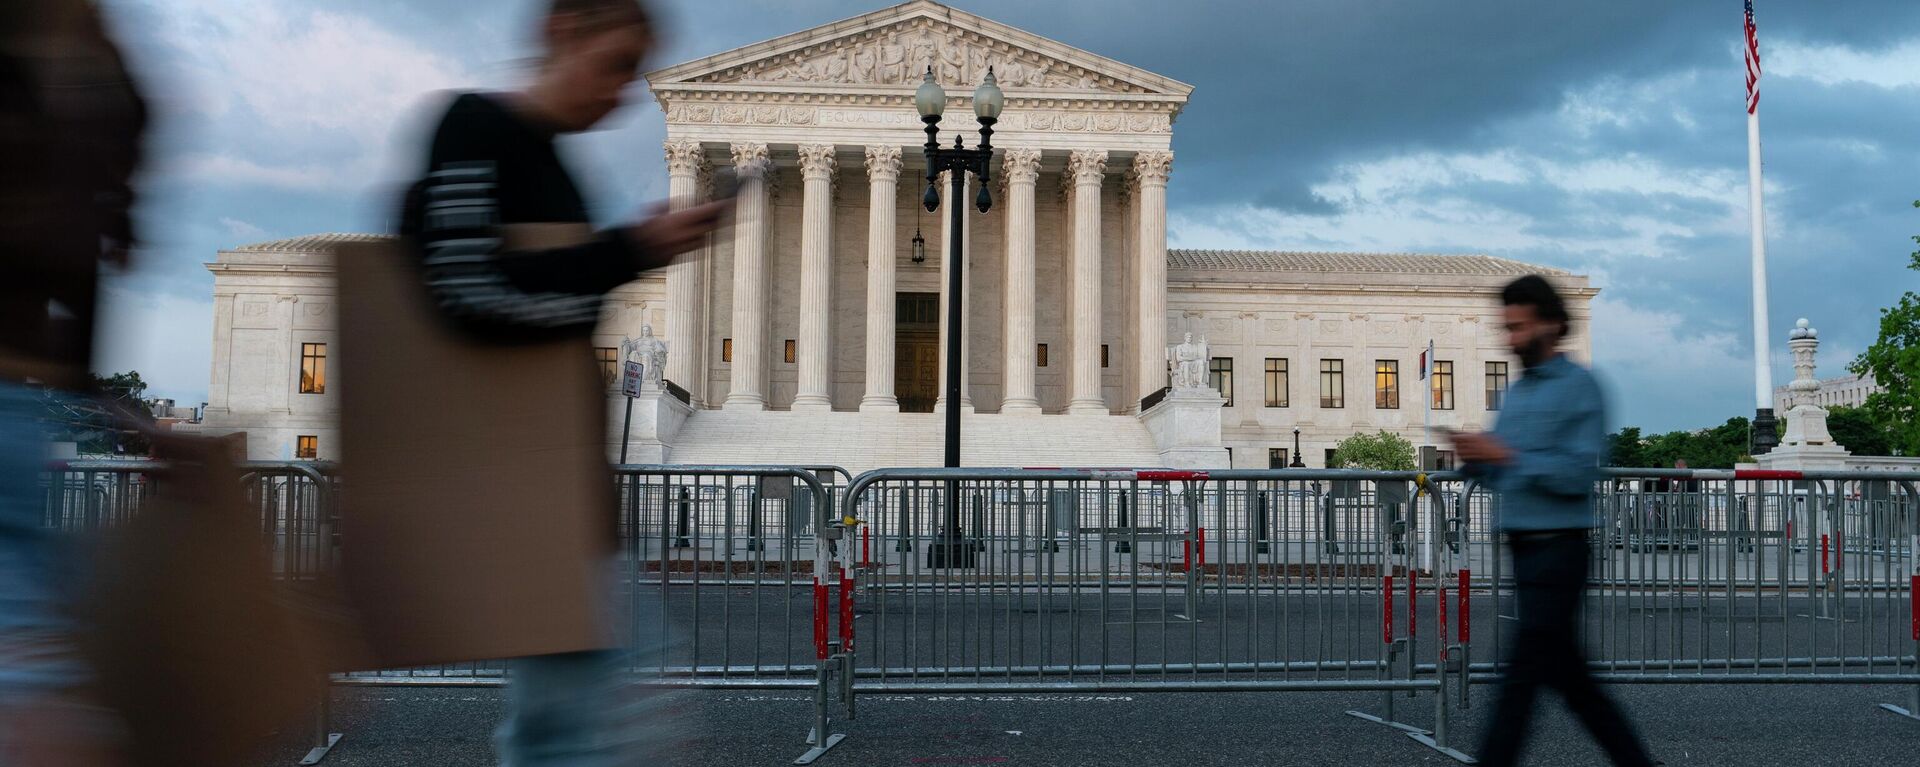 The U.S. Supreme Court building is shown as people walk past, Wednesday, May 4, 2022 in Washington. A draft opinion suggests the U.S. Supreme Court could be poised to overturn the landmark 1973 Roe v. Wade case that legalized abortion nationwide, according to a Politico report released Monday - Sputnik International, 1920, 16.07.2023